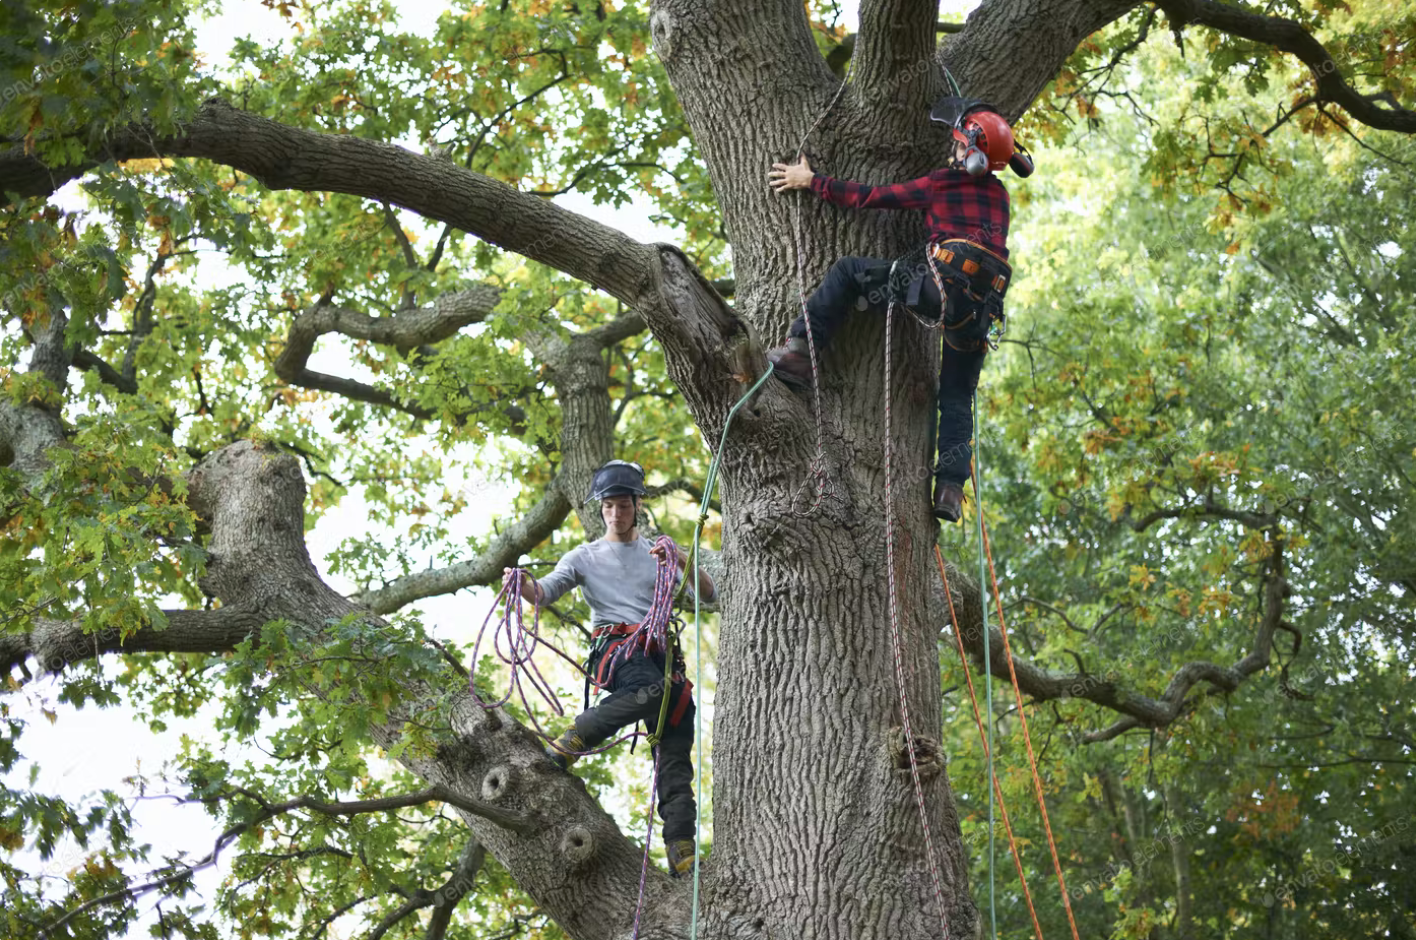 Two professional tree surgeons climbing up a big oak tree with branches cut and climbing ropes in use.